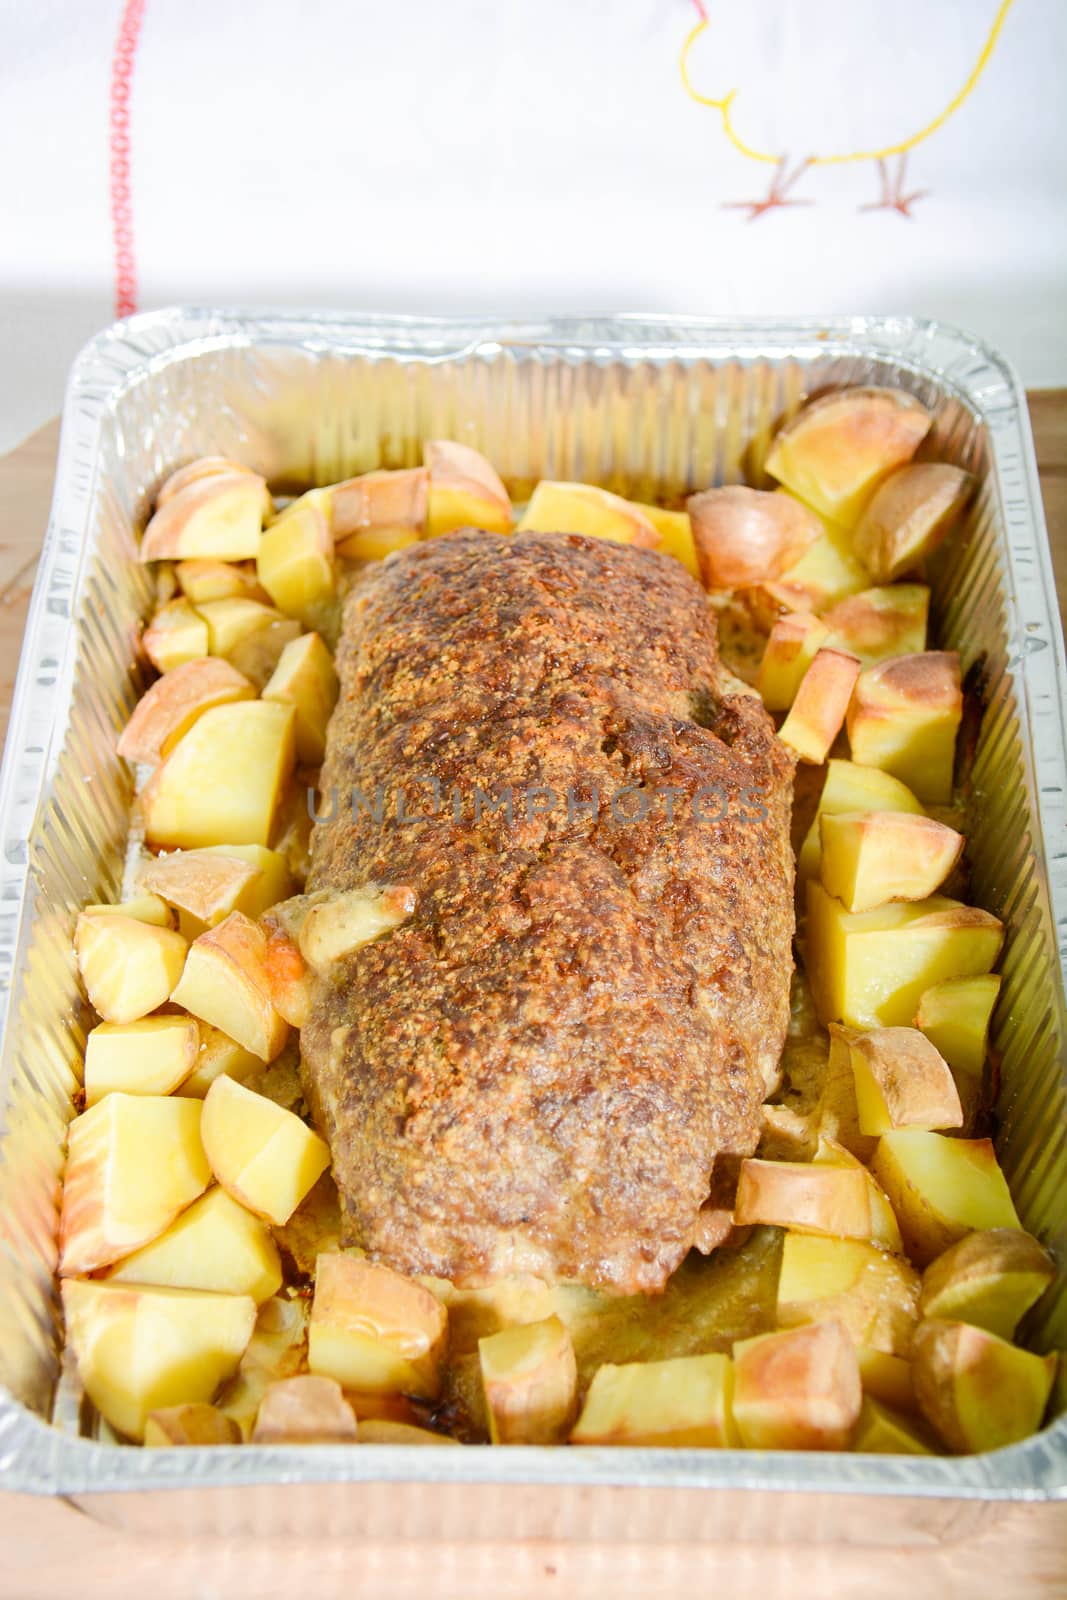 Italian meat loaf with cheese and mortadella